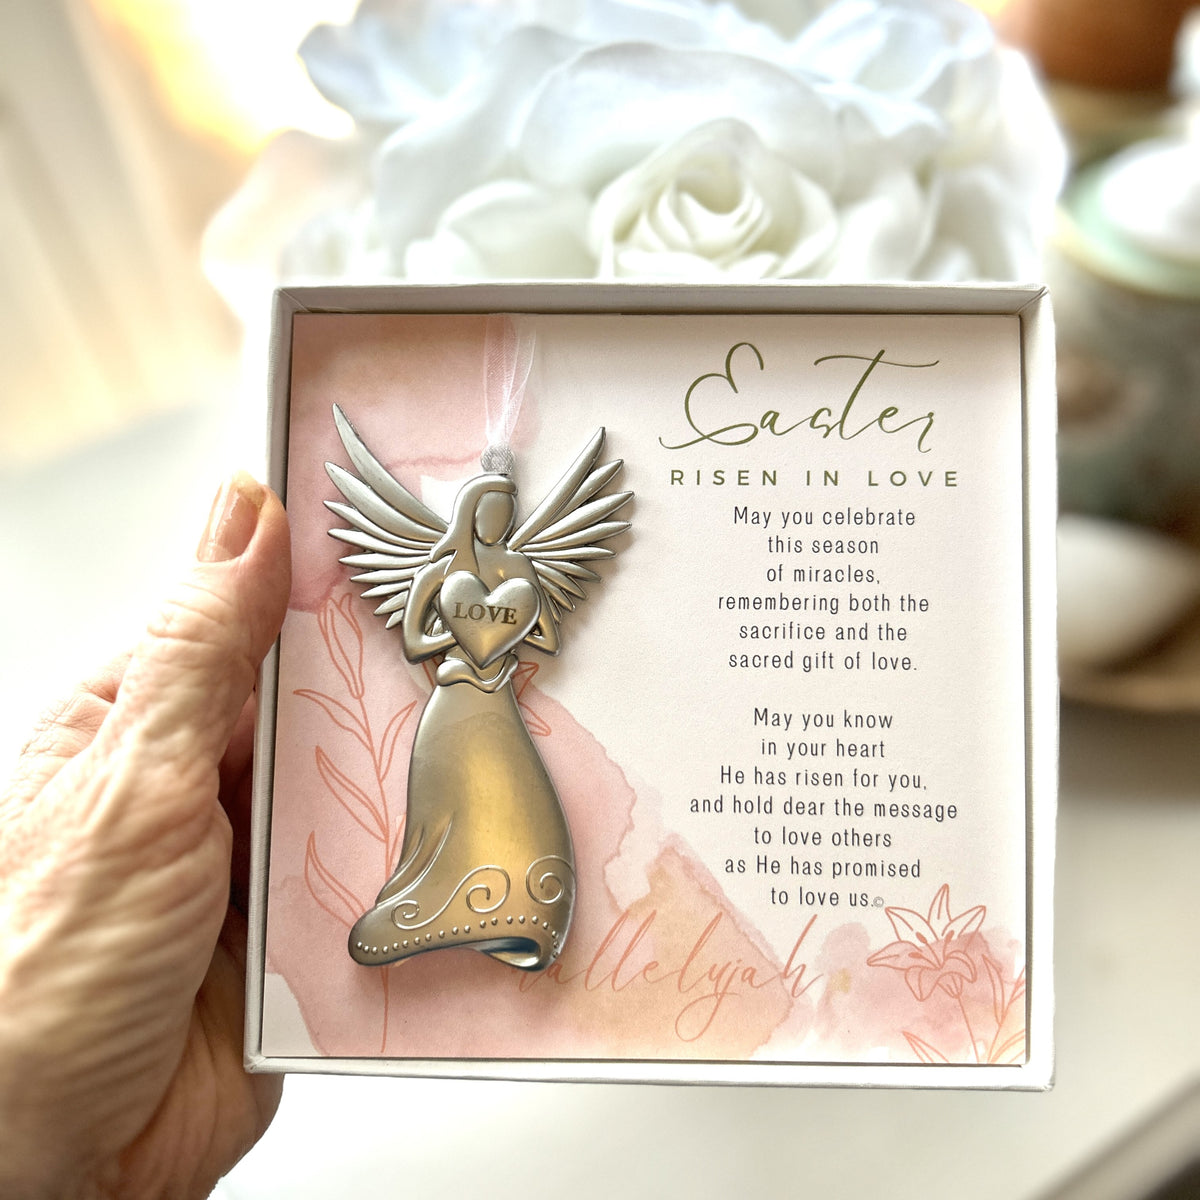 Easter Angel gift being held in a hand.